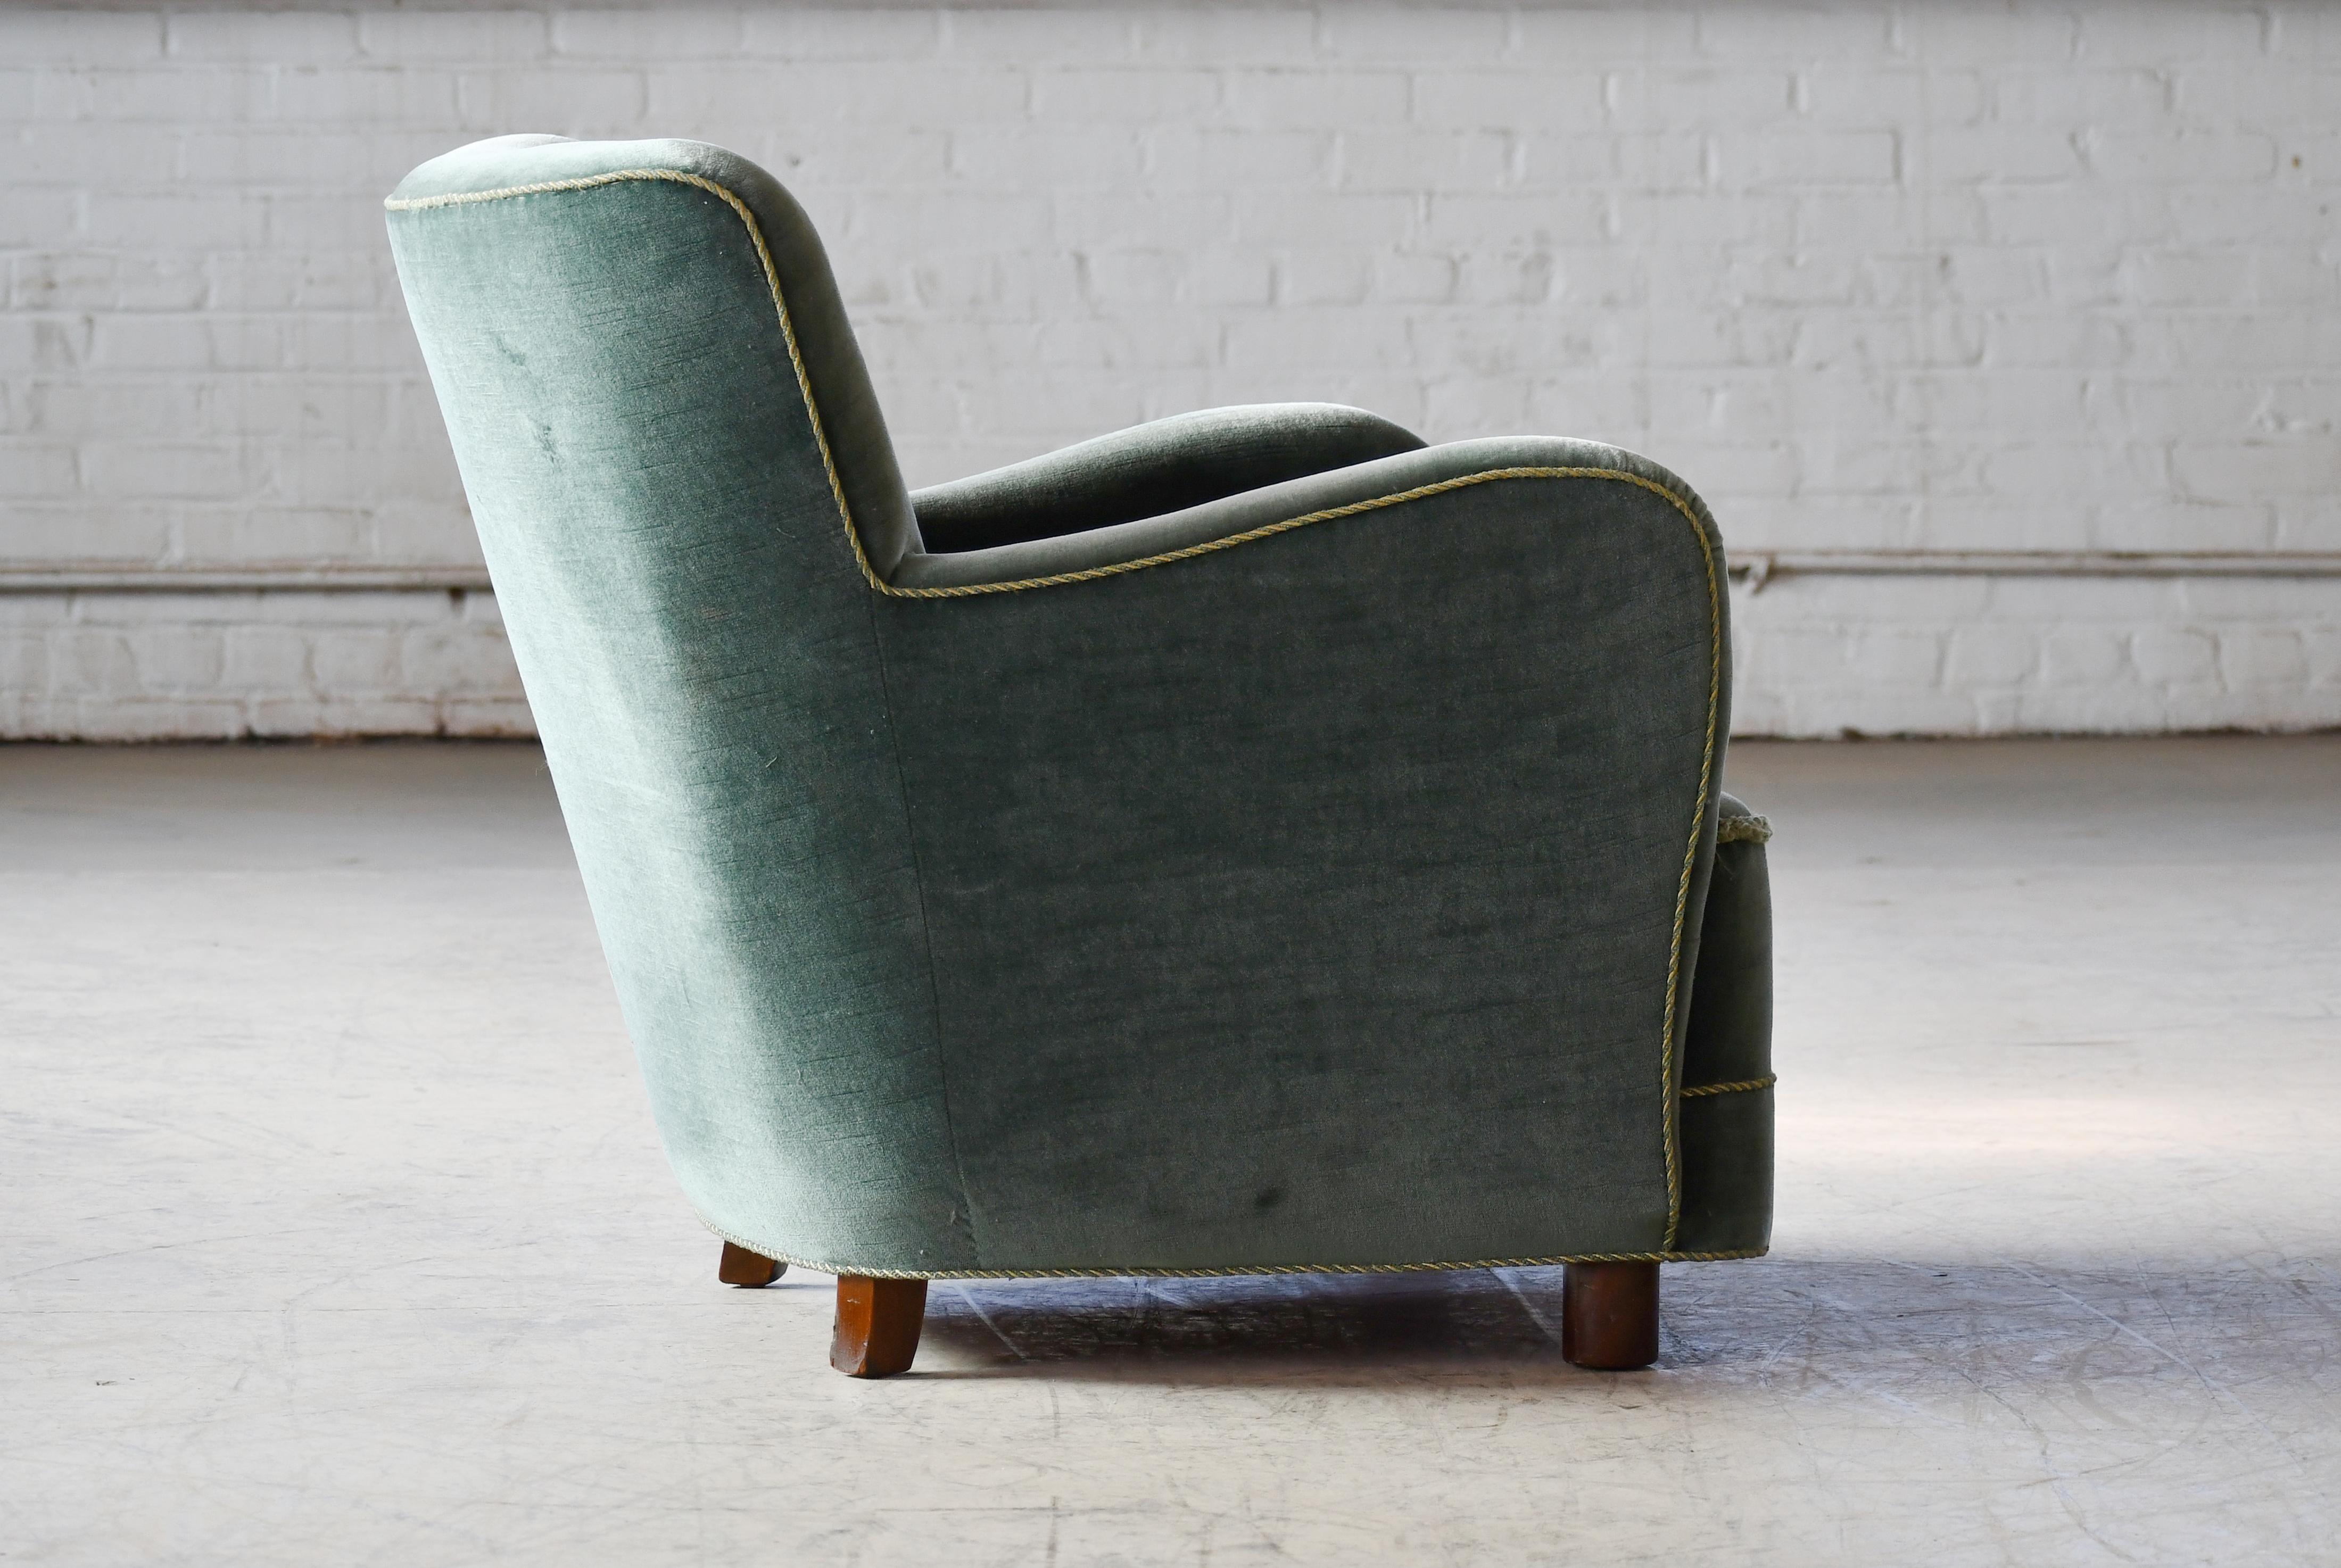 Danish Art Deco or Early Midcentury Lounge Chair in Green Mohair 1930-40s 4